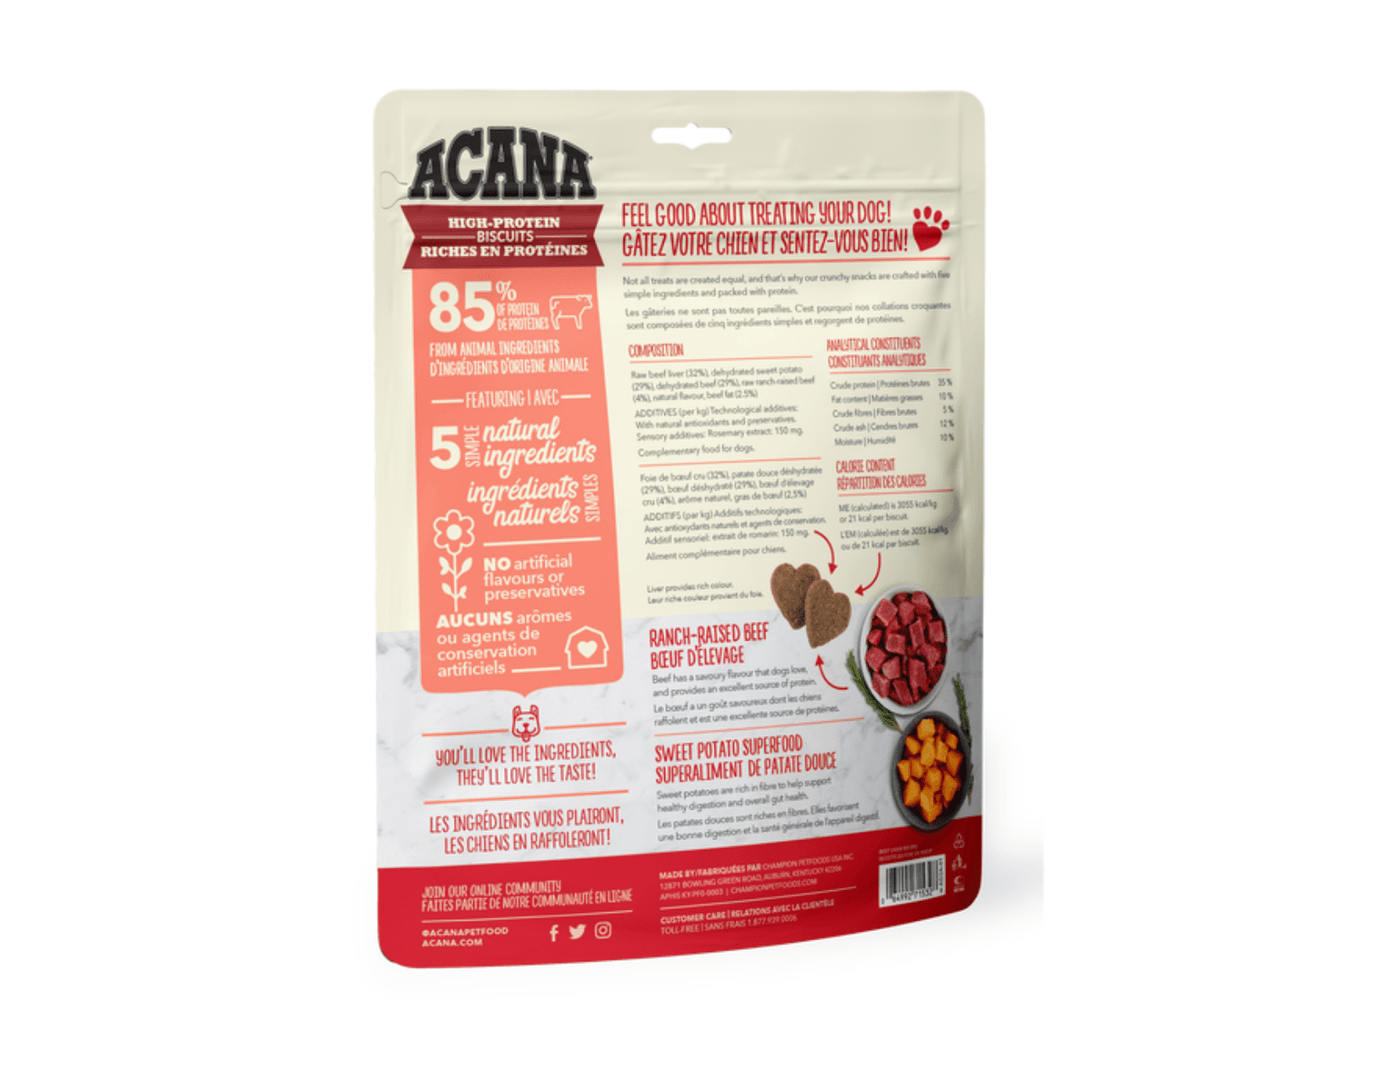 Acana High-Protein Biscuits for Medium to Large Dogs - Crunchy Beef Liver Recipe 255 g - Dog Treats - ACANA - PetToba-ACANA